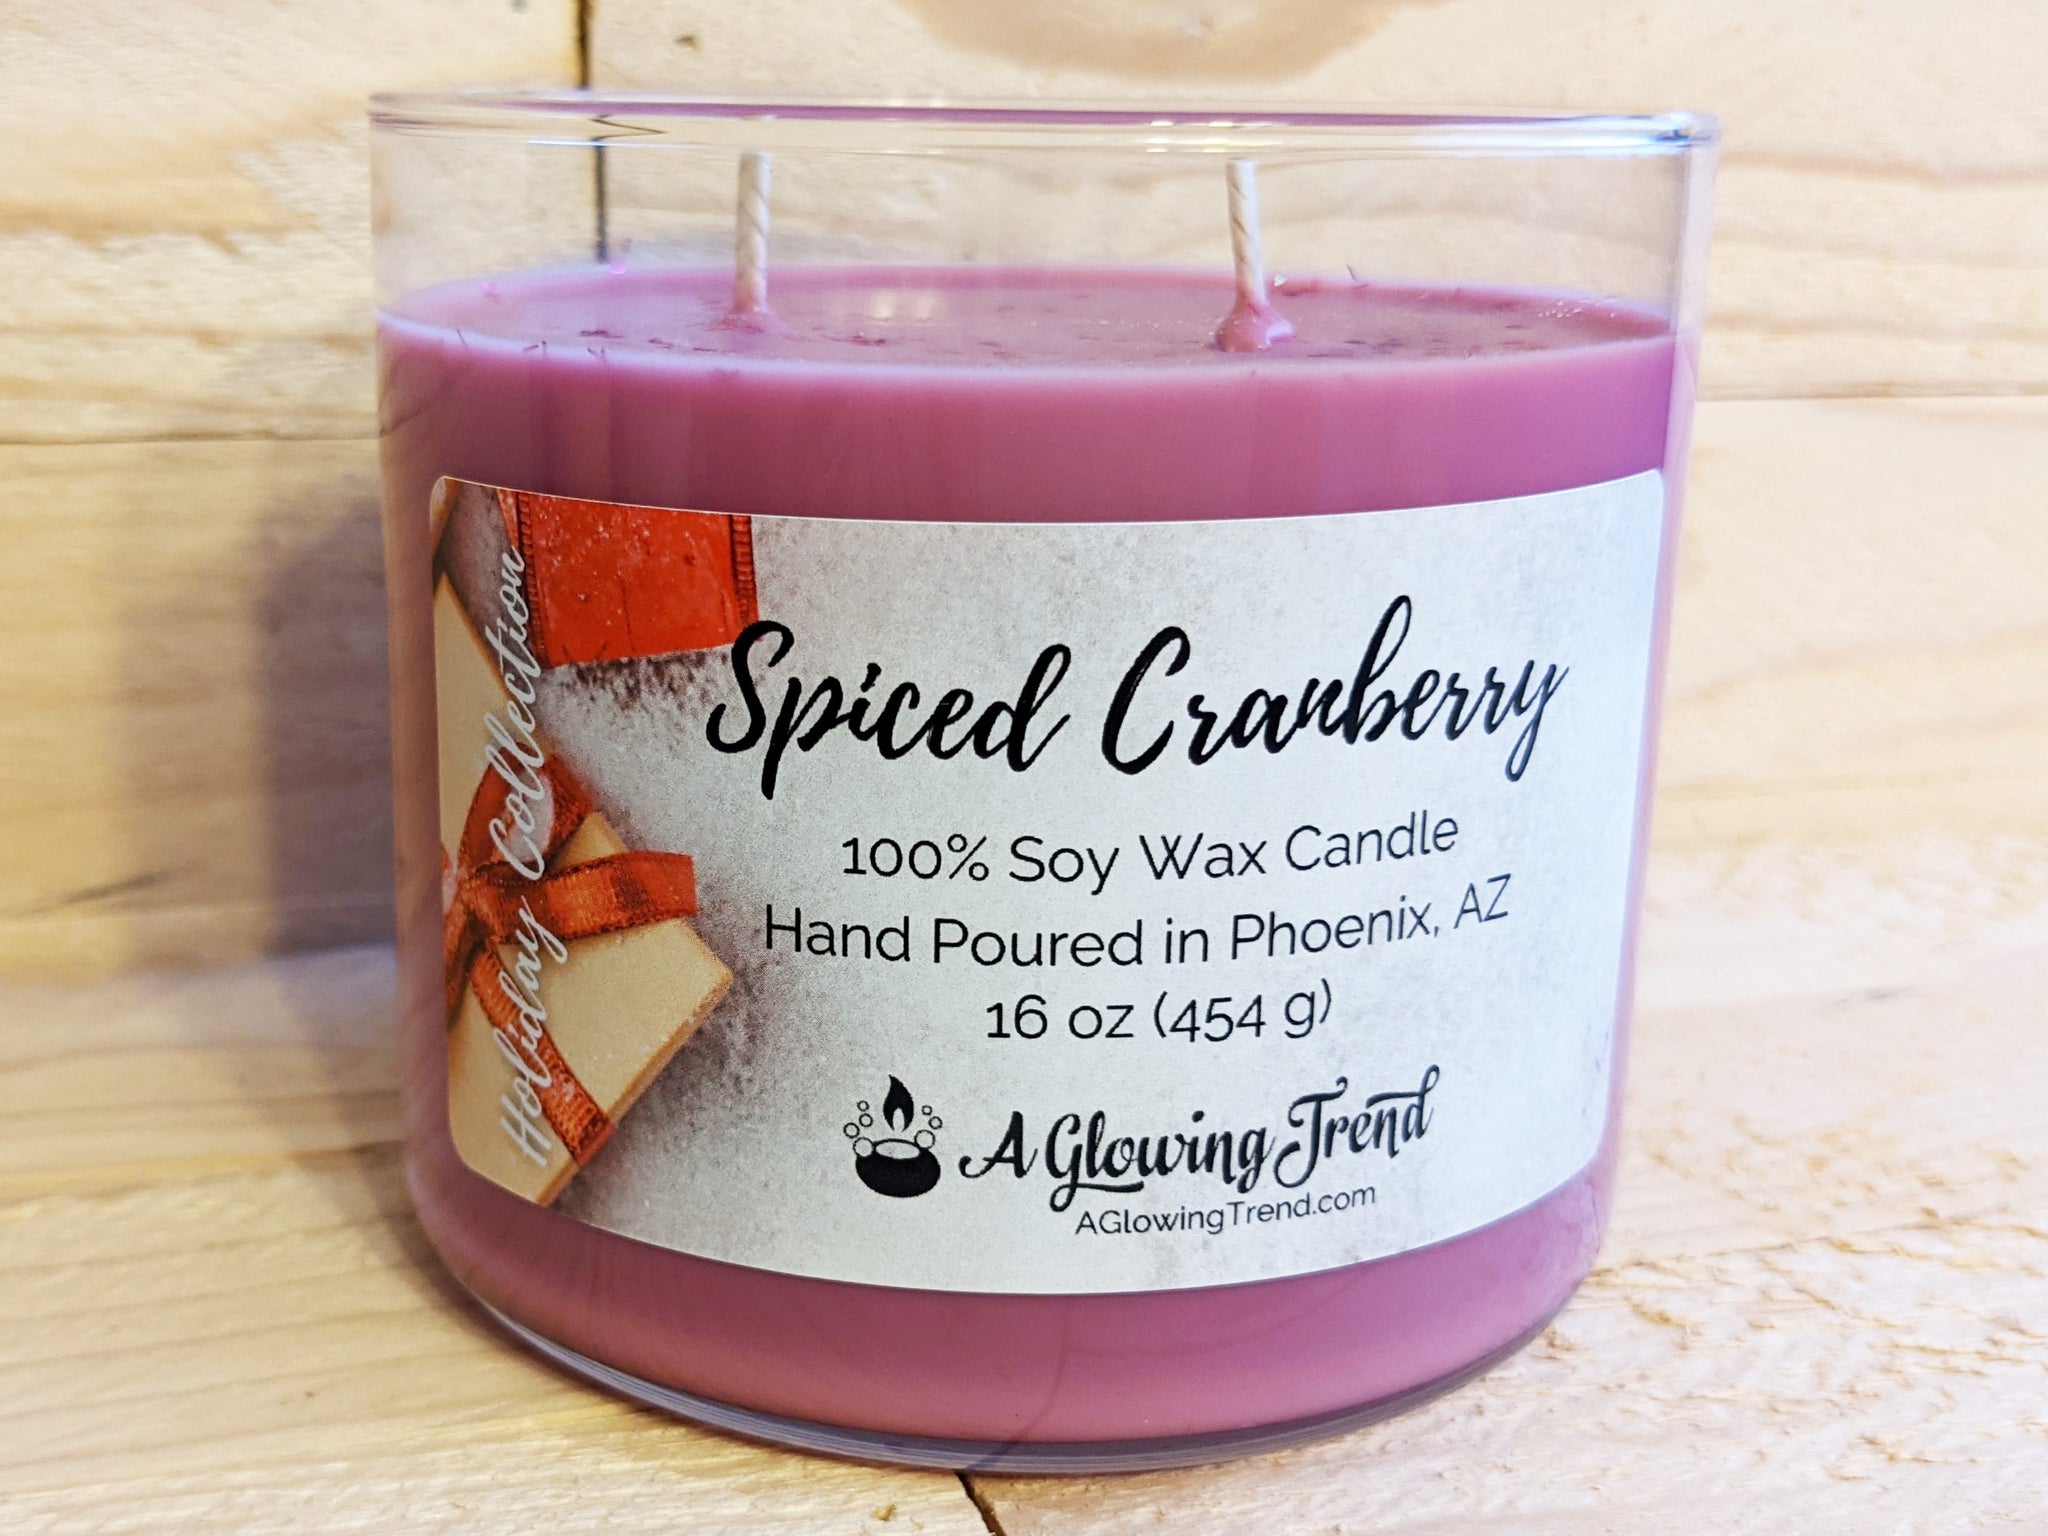 A 16 oz glass tumbler containing a purple Spiced Cranberry scented soy candle topped with glitter by A Glowing Trend.